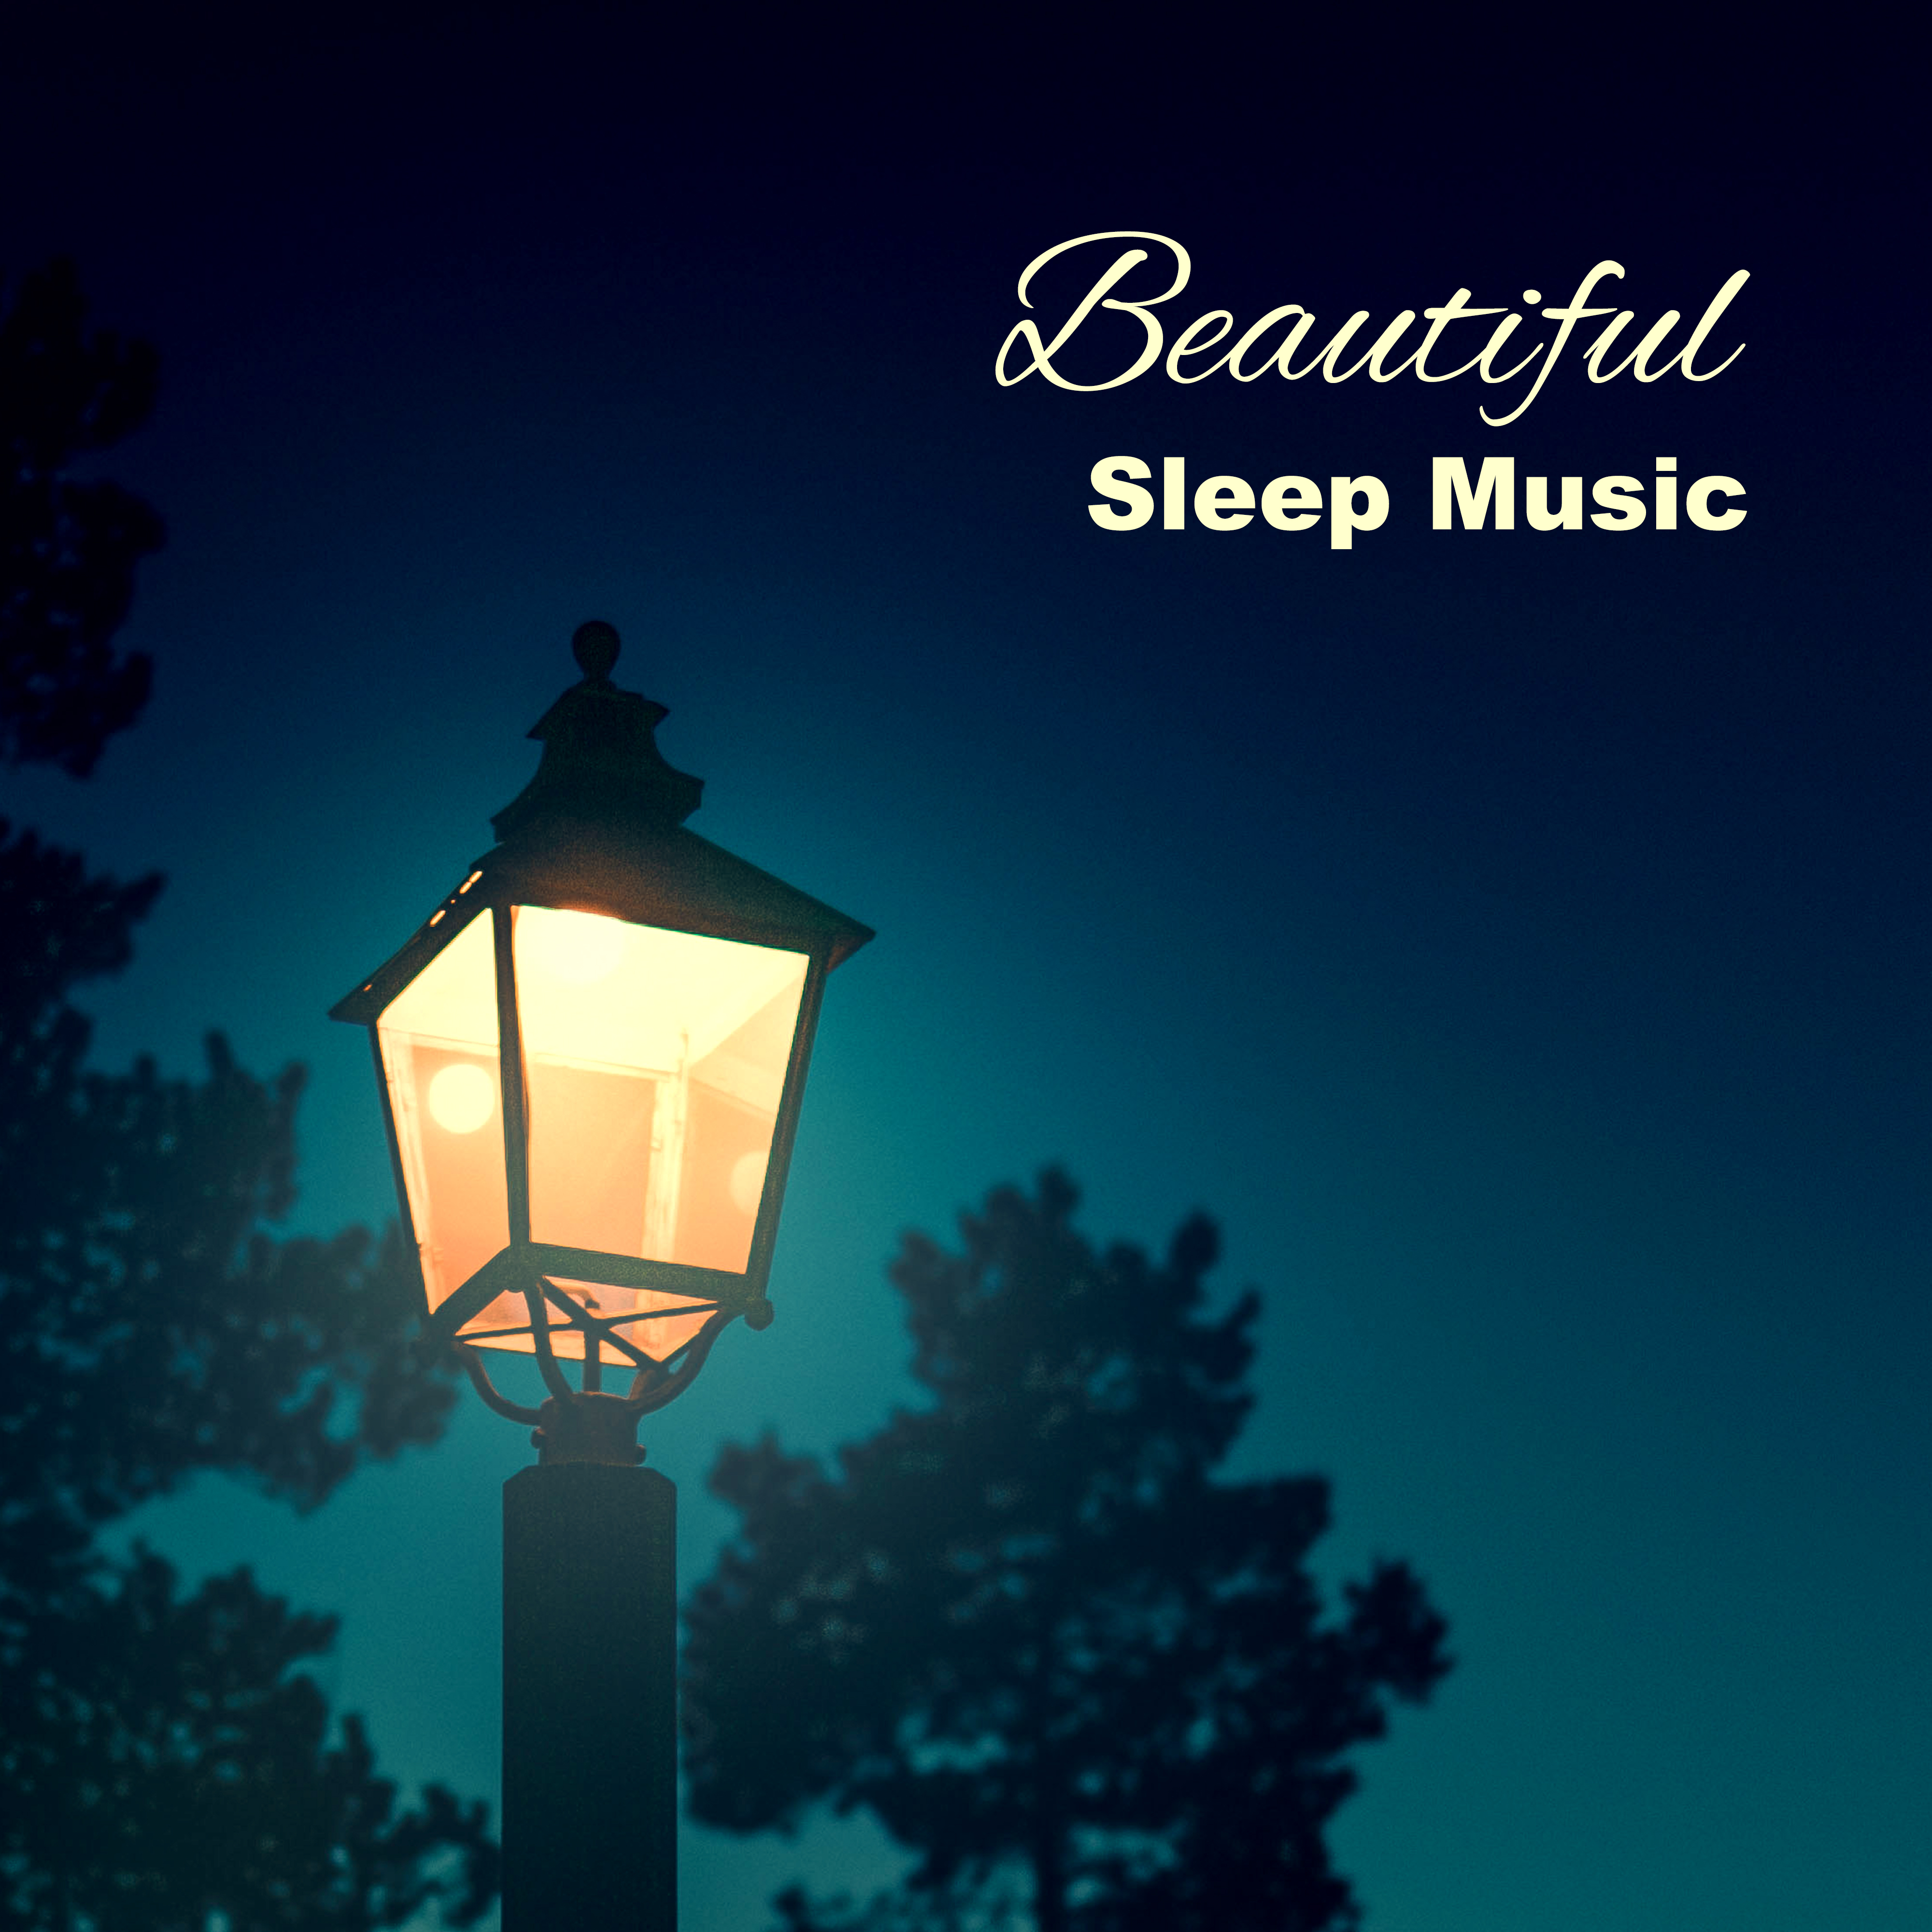 Beautiful Sleep Music  Classical Music to Fall Asleep, Rest with Classics Melodies, Famous Composers